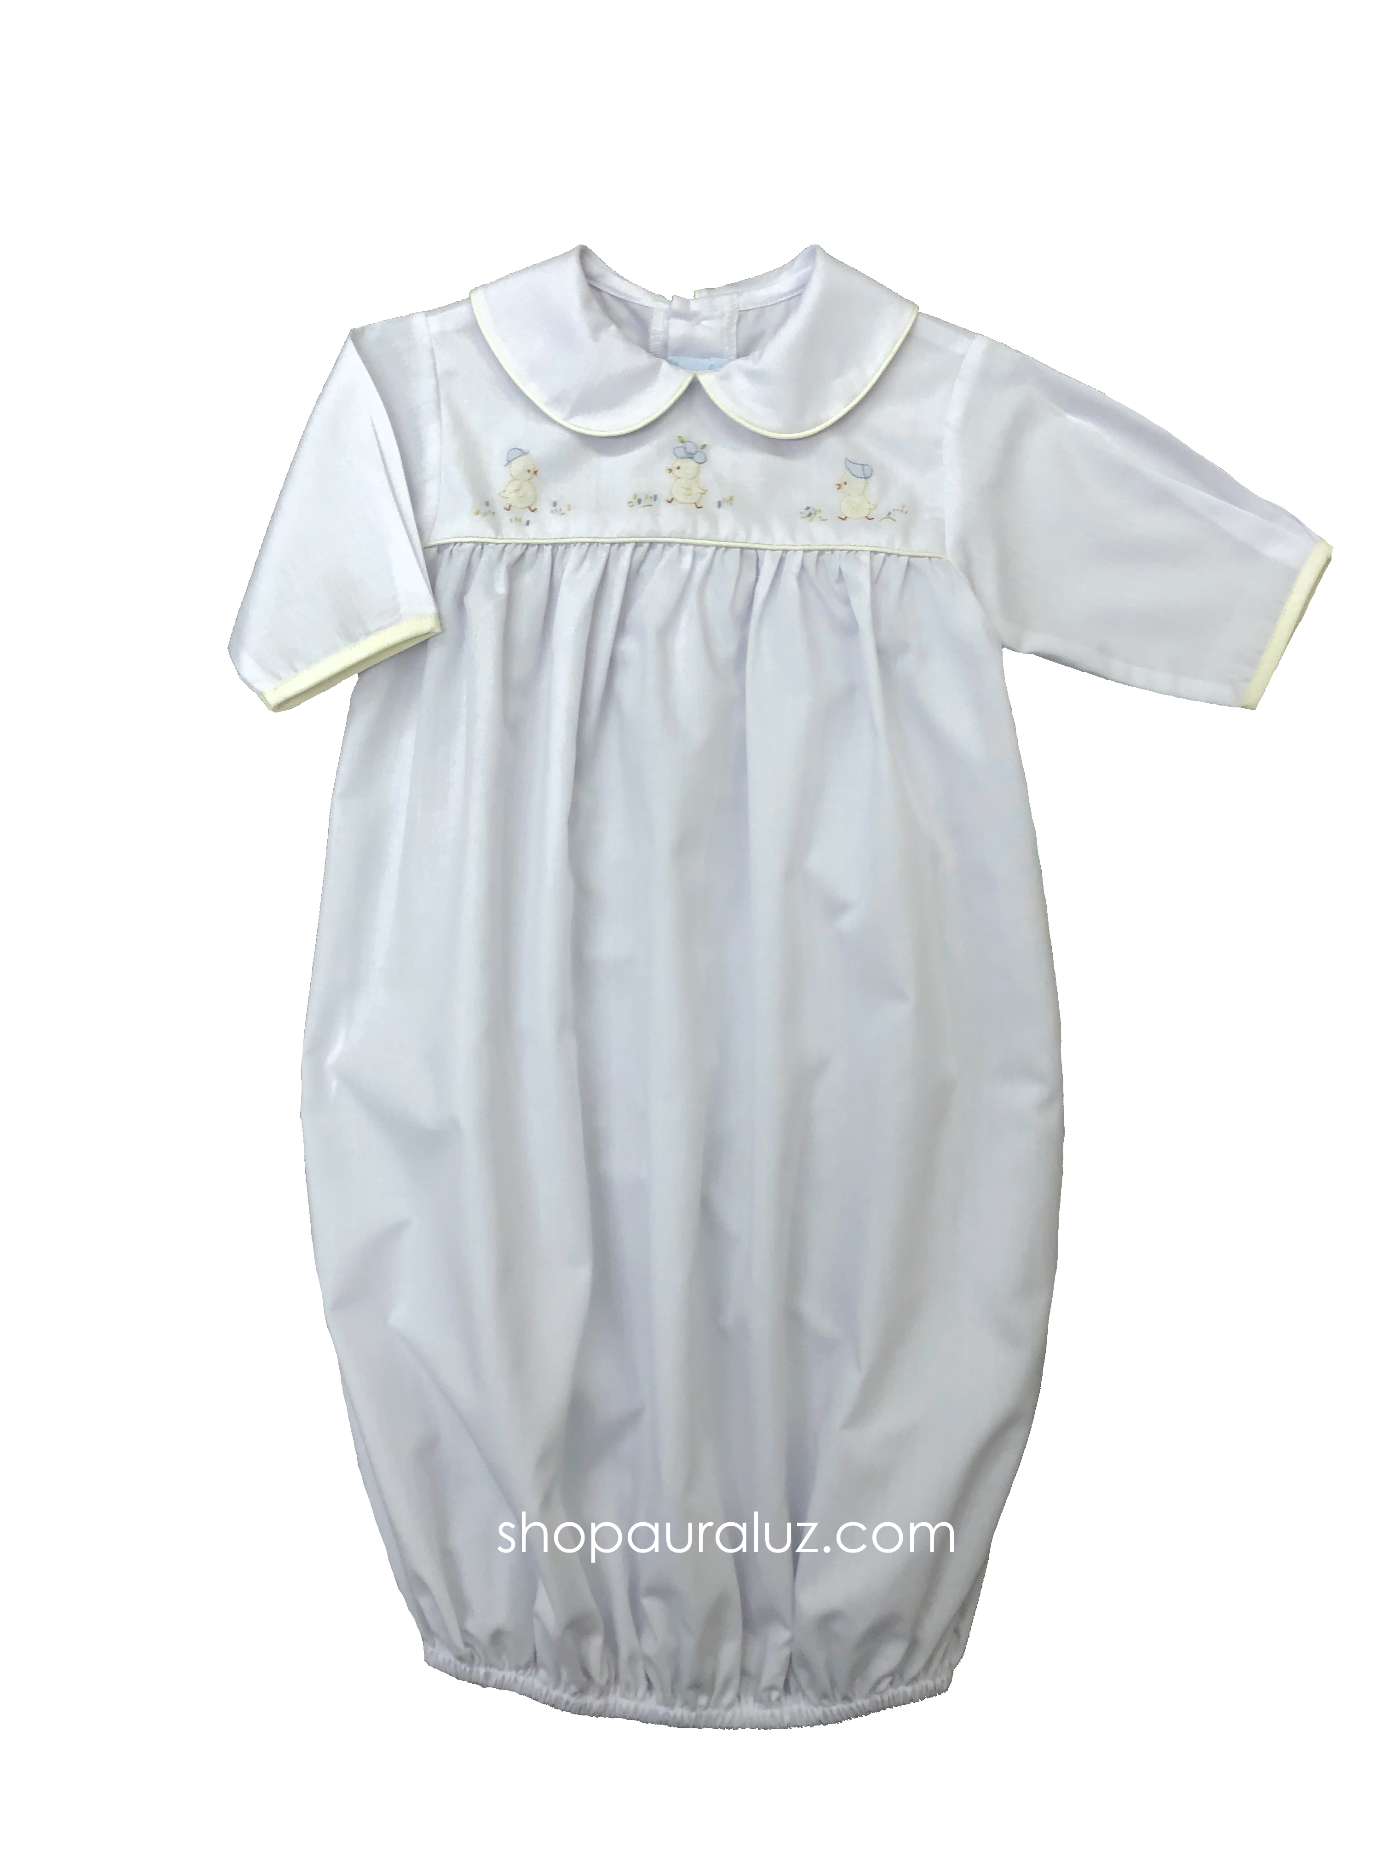 Auraluz Saque, l/s...White with p.p.collar, yellow binding trim and embroidered chicks